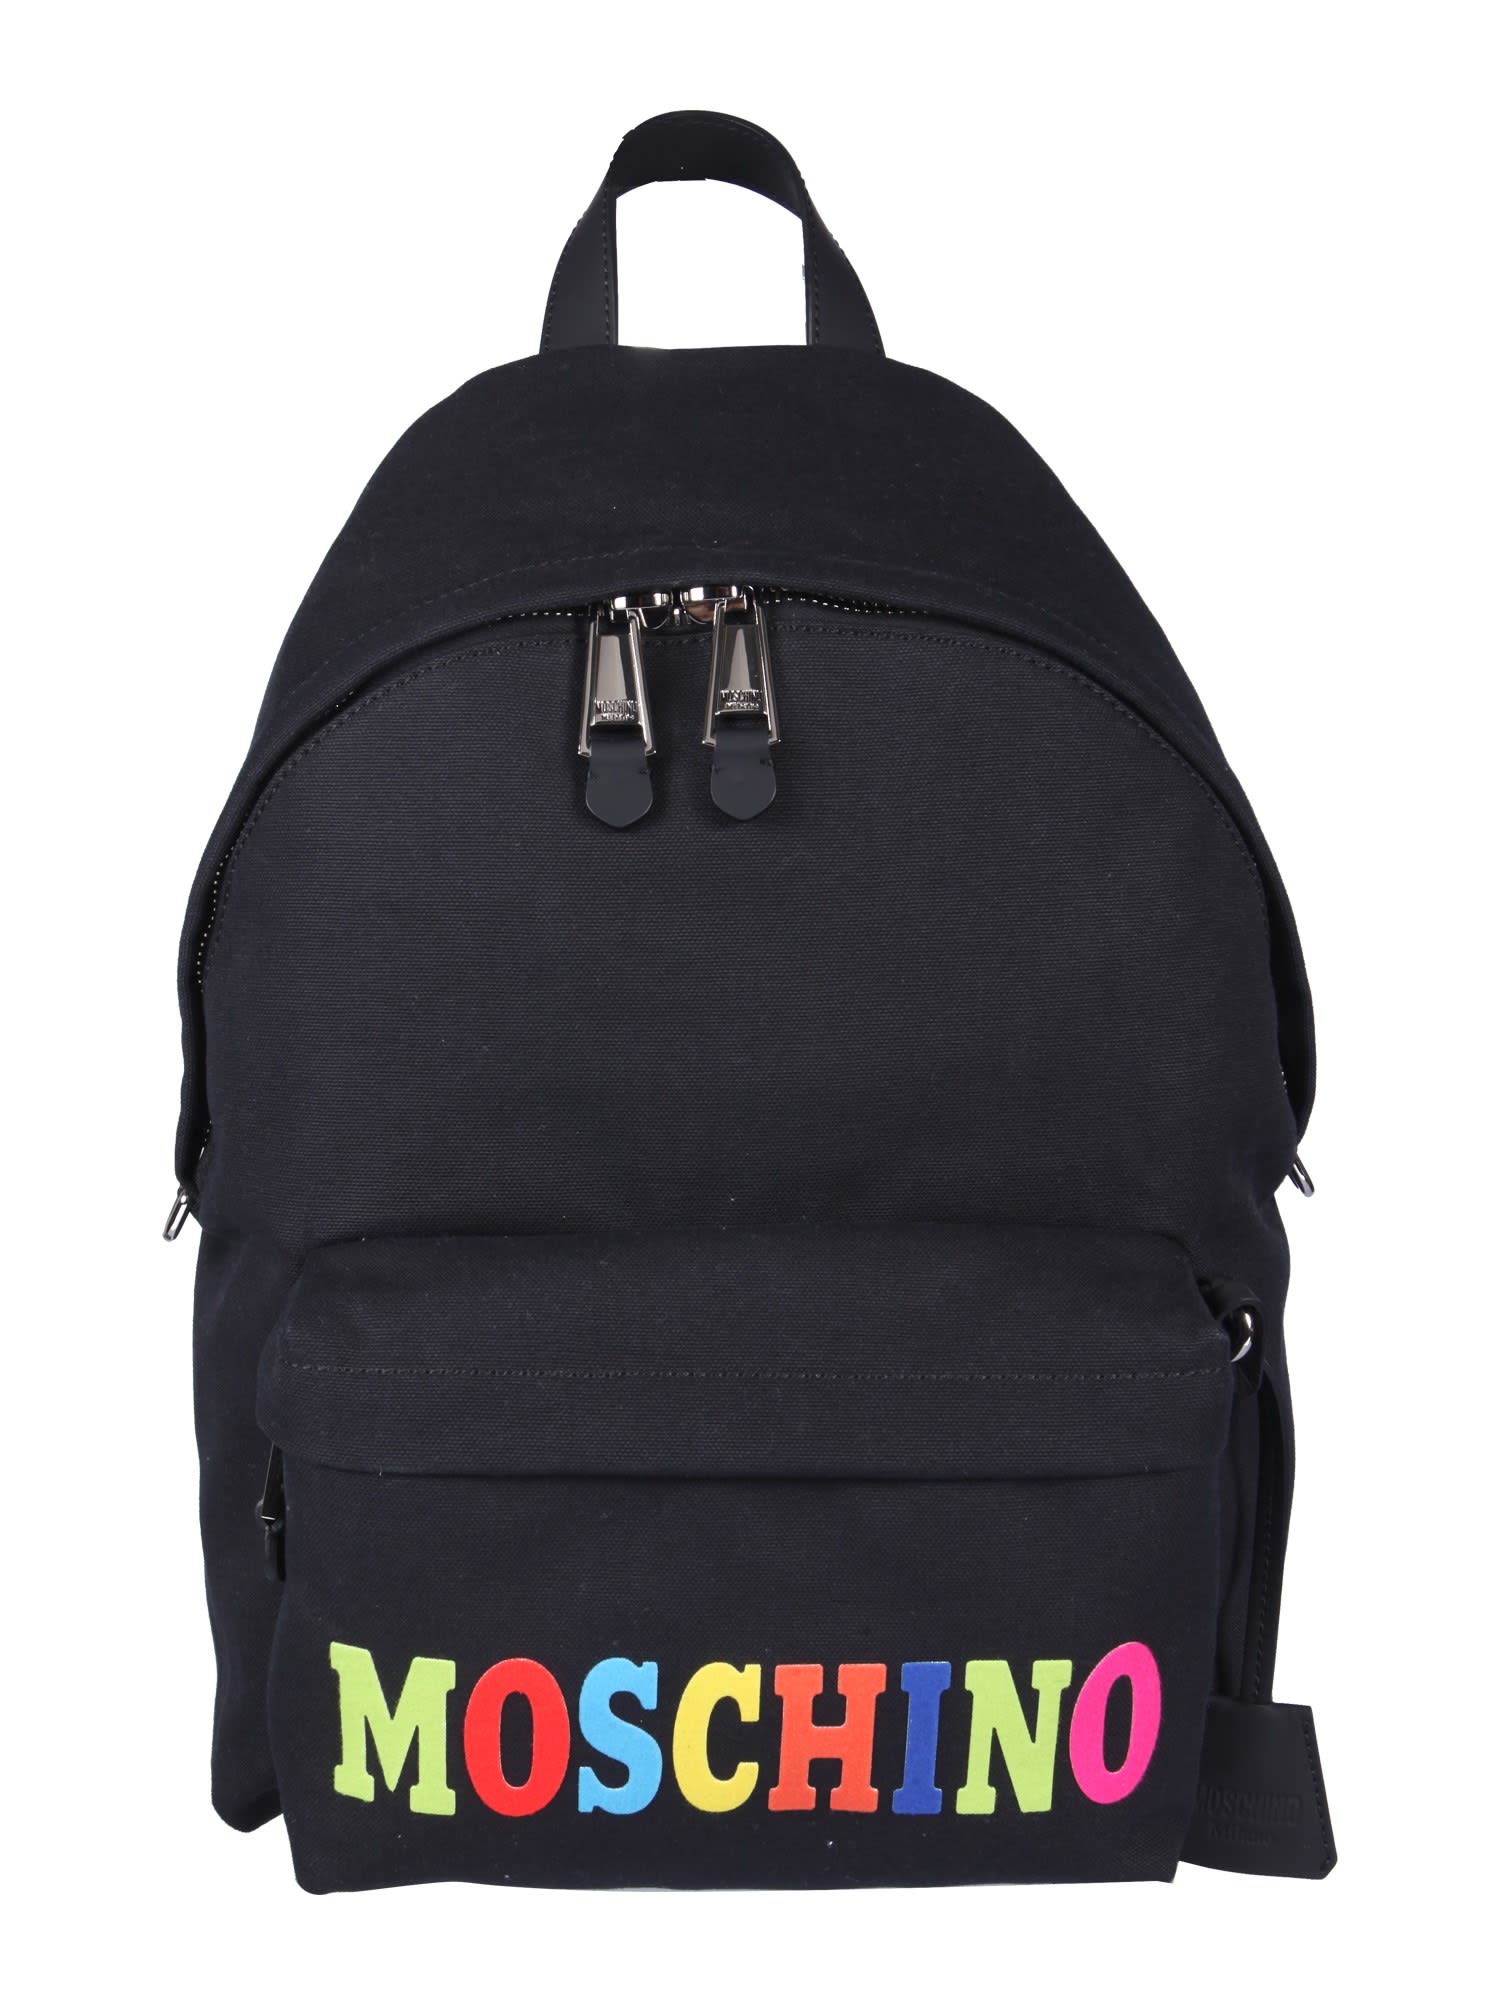 Moschino Canvas Backpack